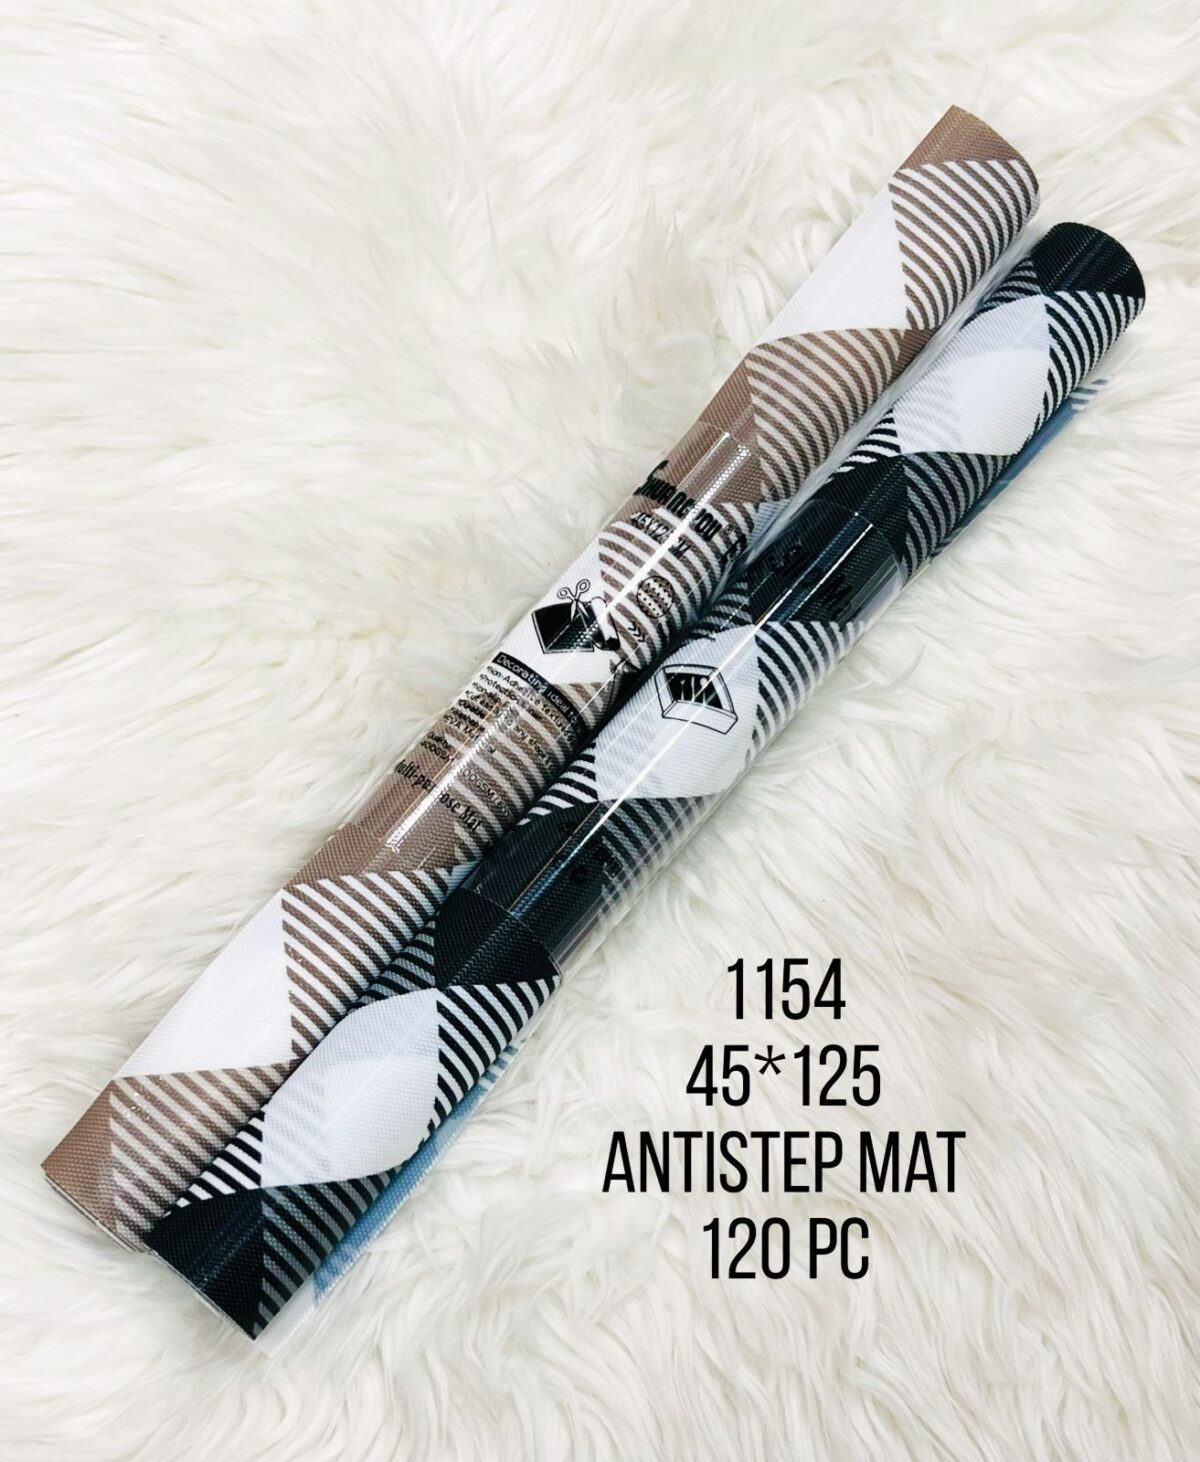 An “anti-slip mat roll (45*125cm)” is a roll of material that is 45 centimeters wide and 500 centimeters long, designed to provide a non-slip surface. It is commonly used to line drawers, shelves, or other surfaces to prevent items from sliding and to increase stability.